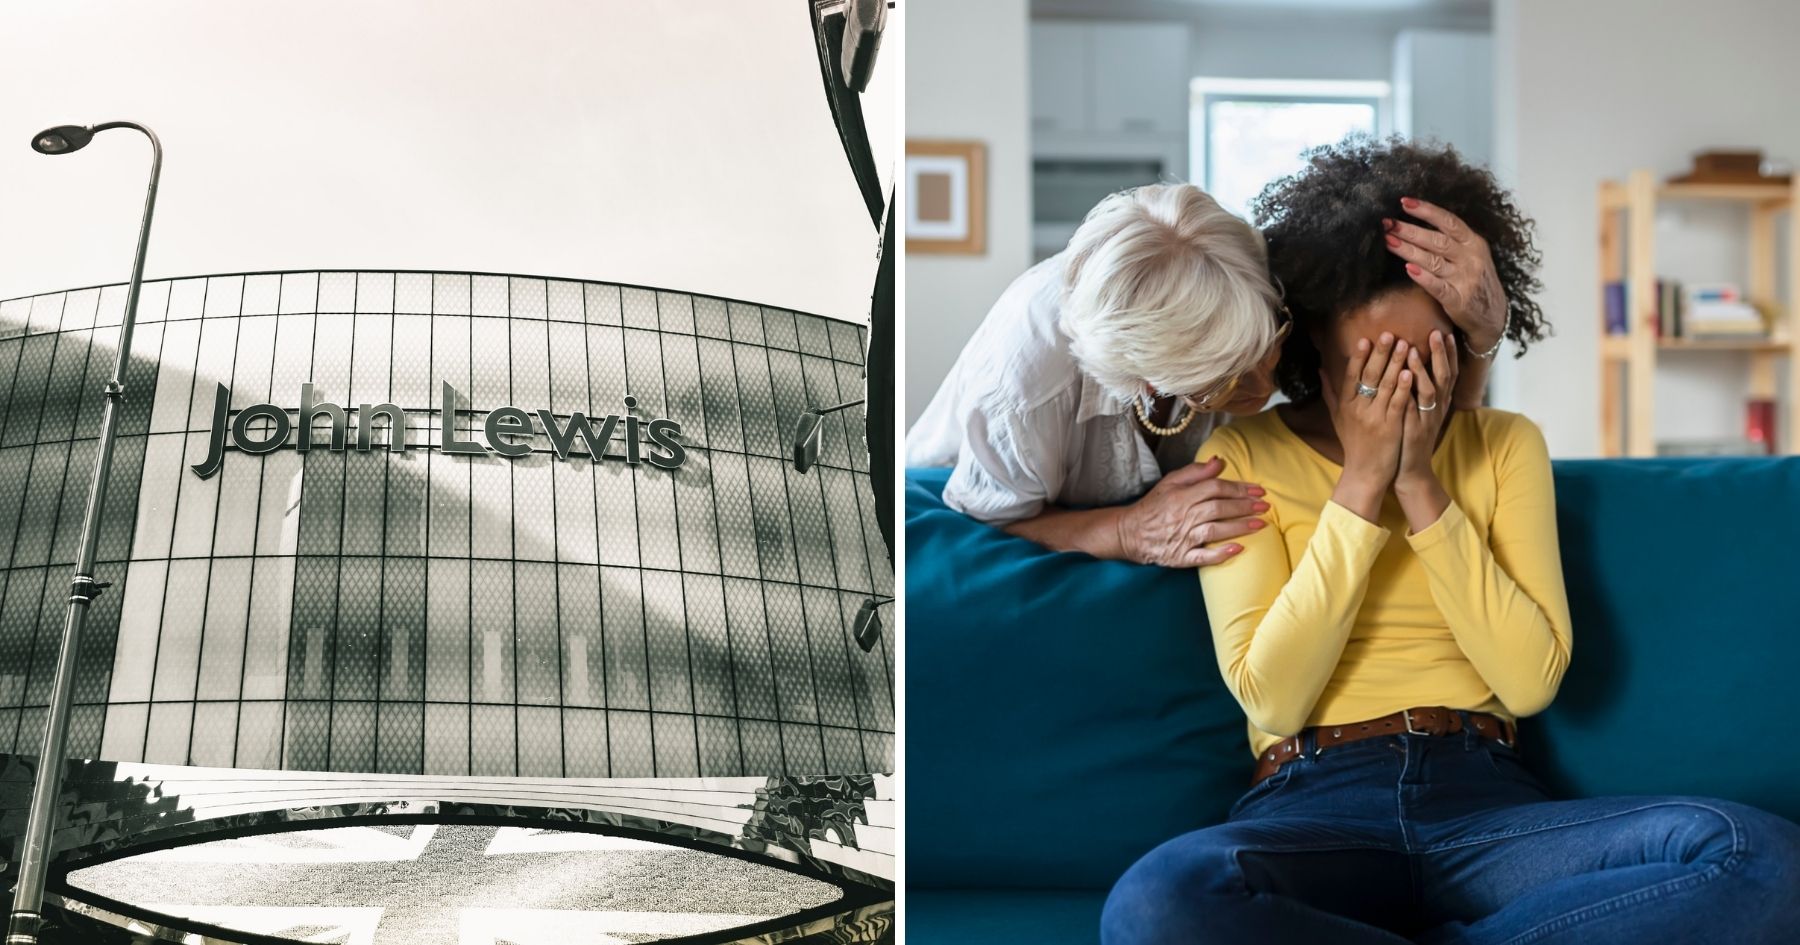 John Lewis will give time off for pregnancy loss at any stage